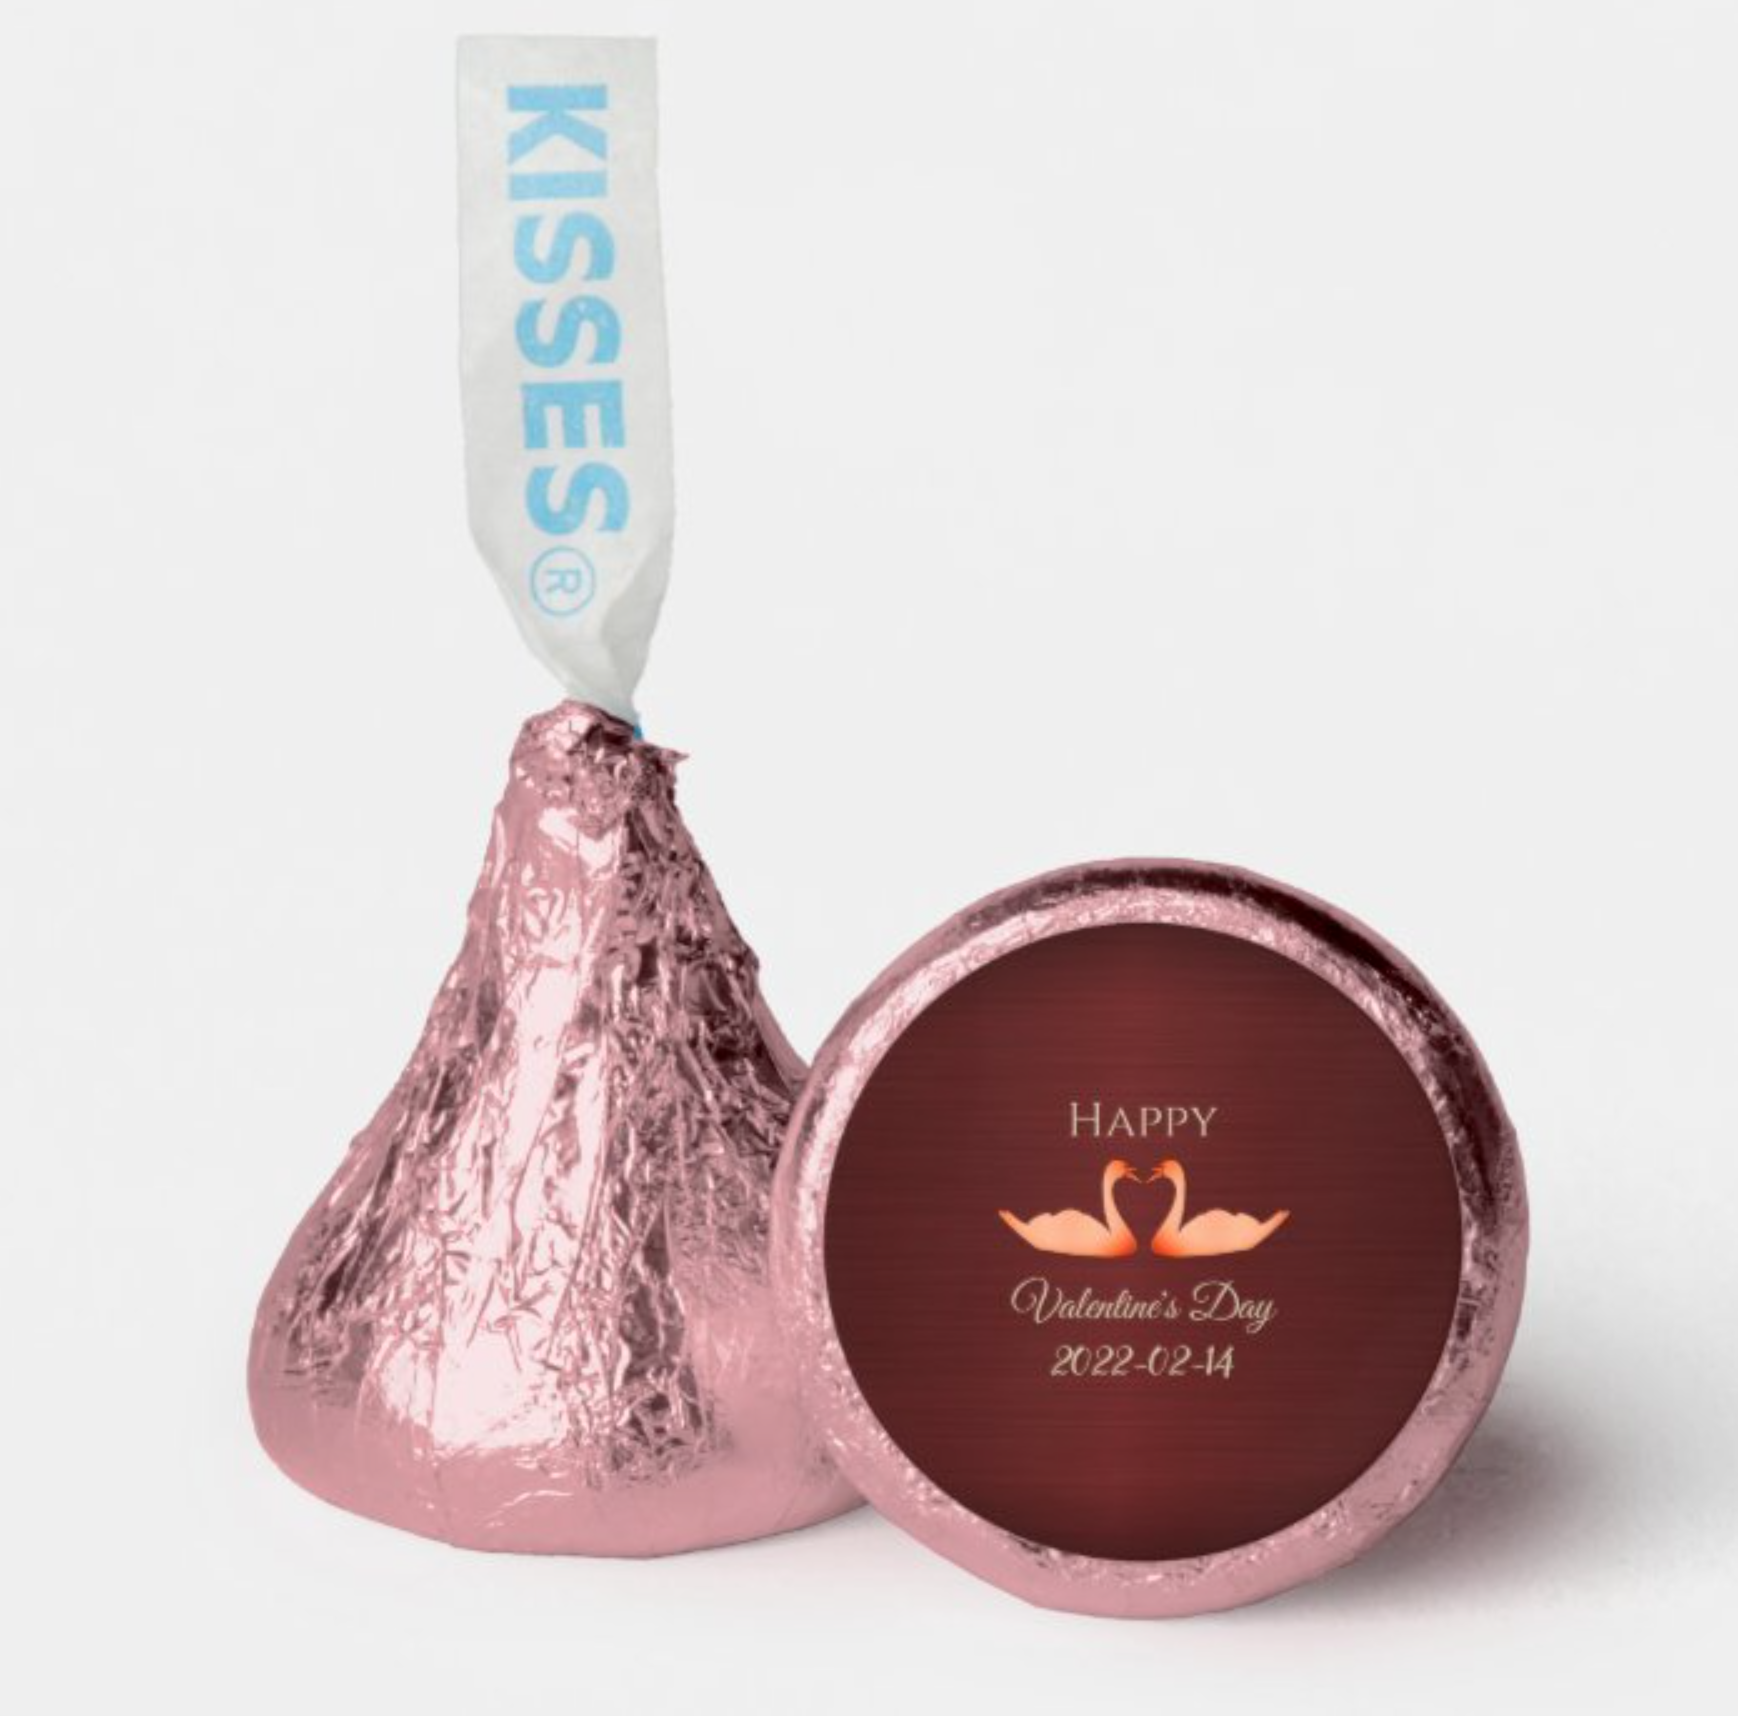 Valentines Day Hershey's Candy Favors